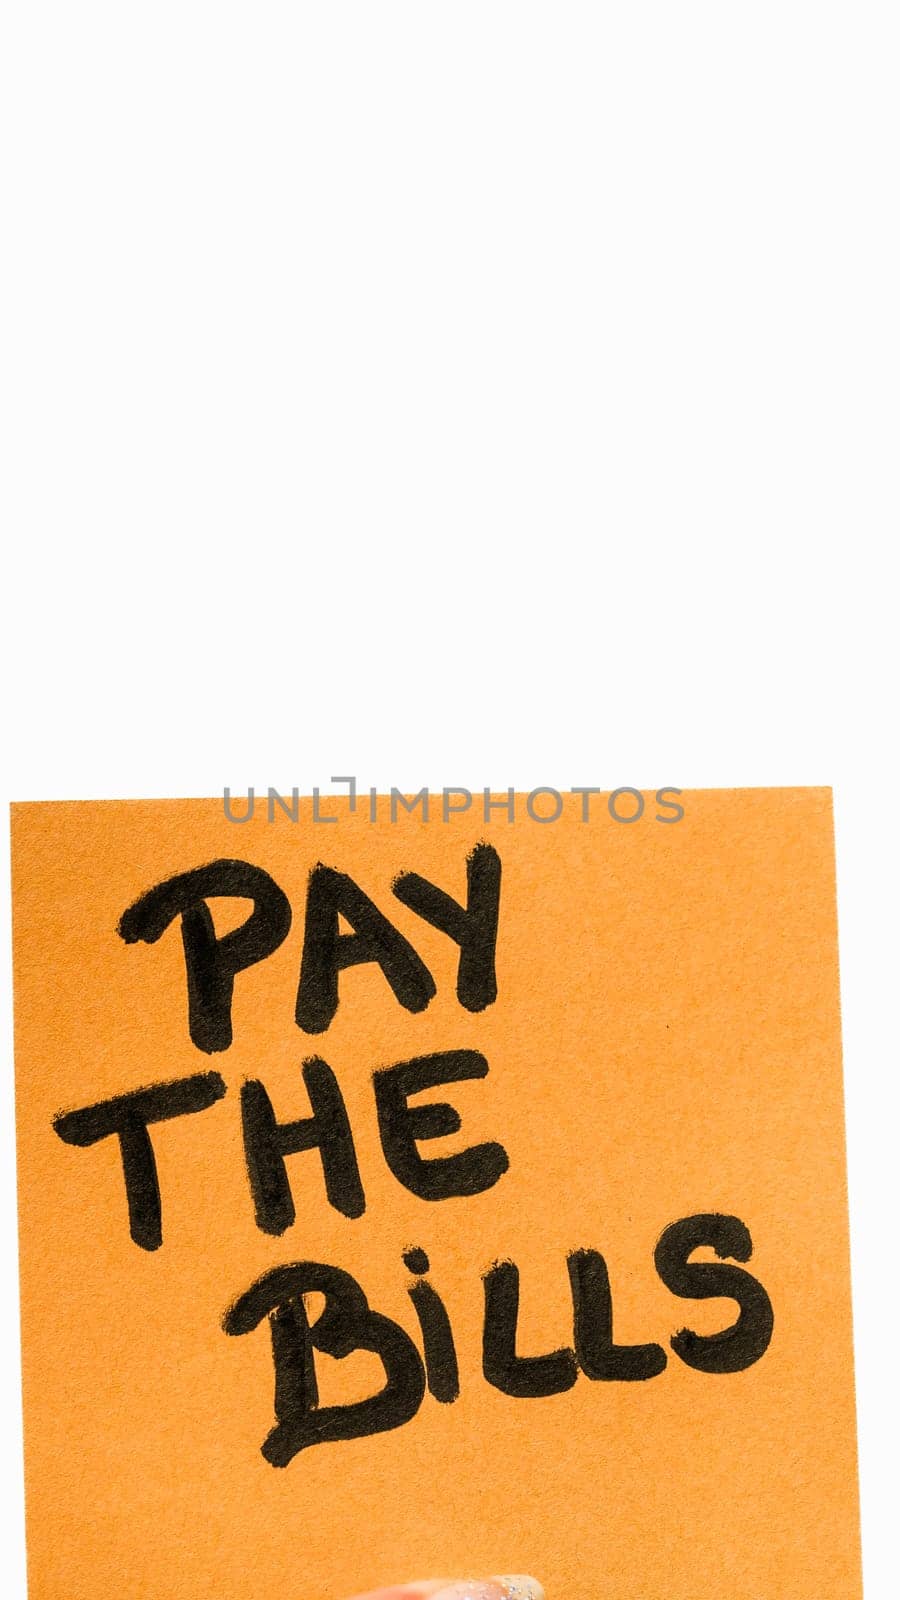 Pay bills handwriting text close up isolated on orange paper with copy space. by vladispas